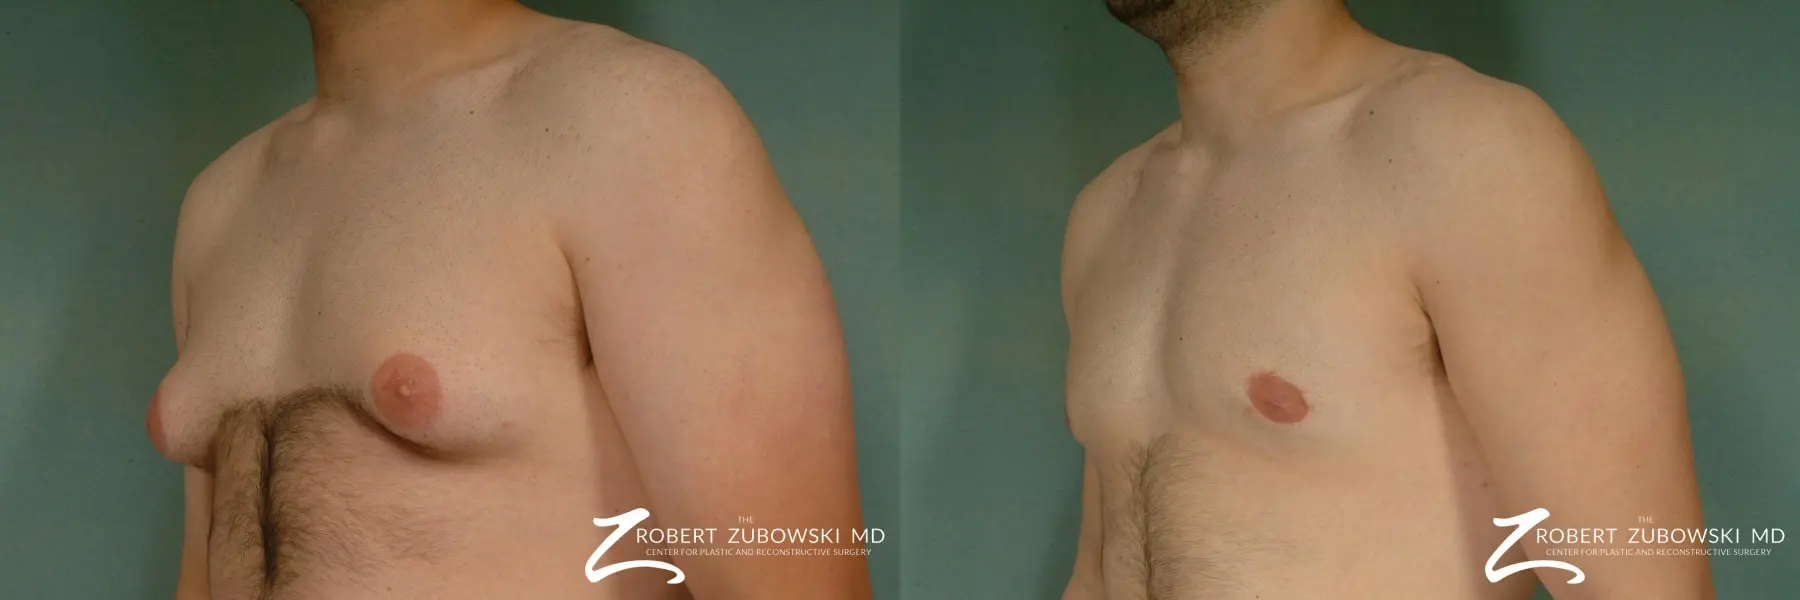 Gynecomastia: Patient 12 - Before and After 2